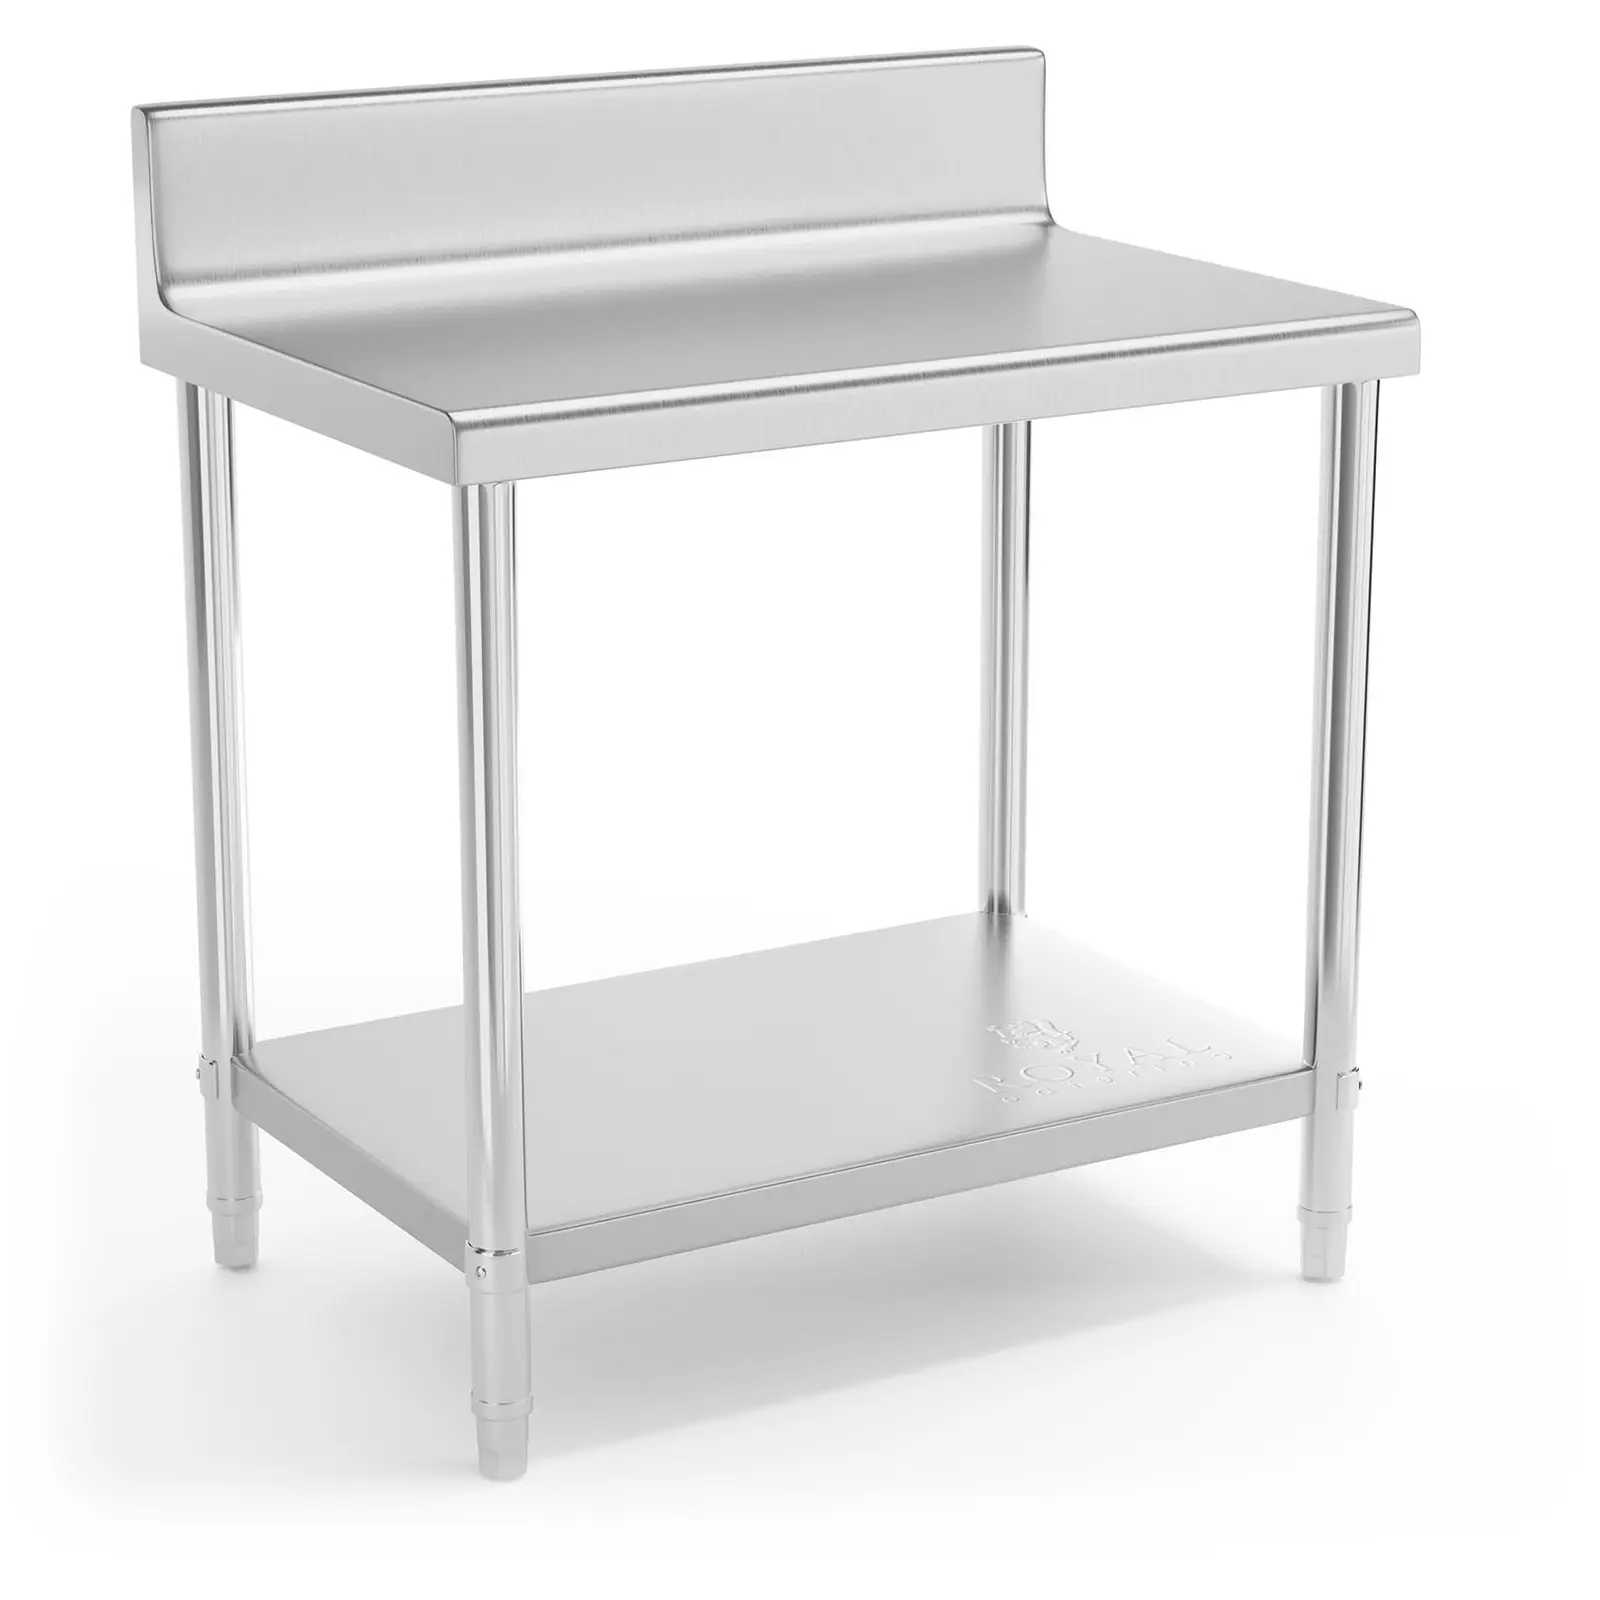 Stainless Steel Work Table - 90 x 60 cm - upstand - 210 kg load capacity